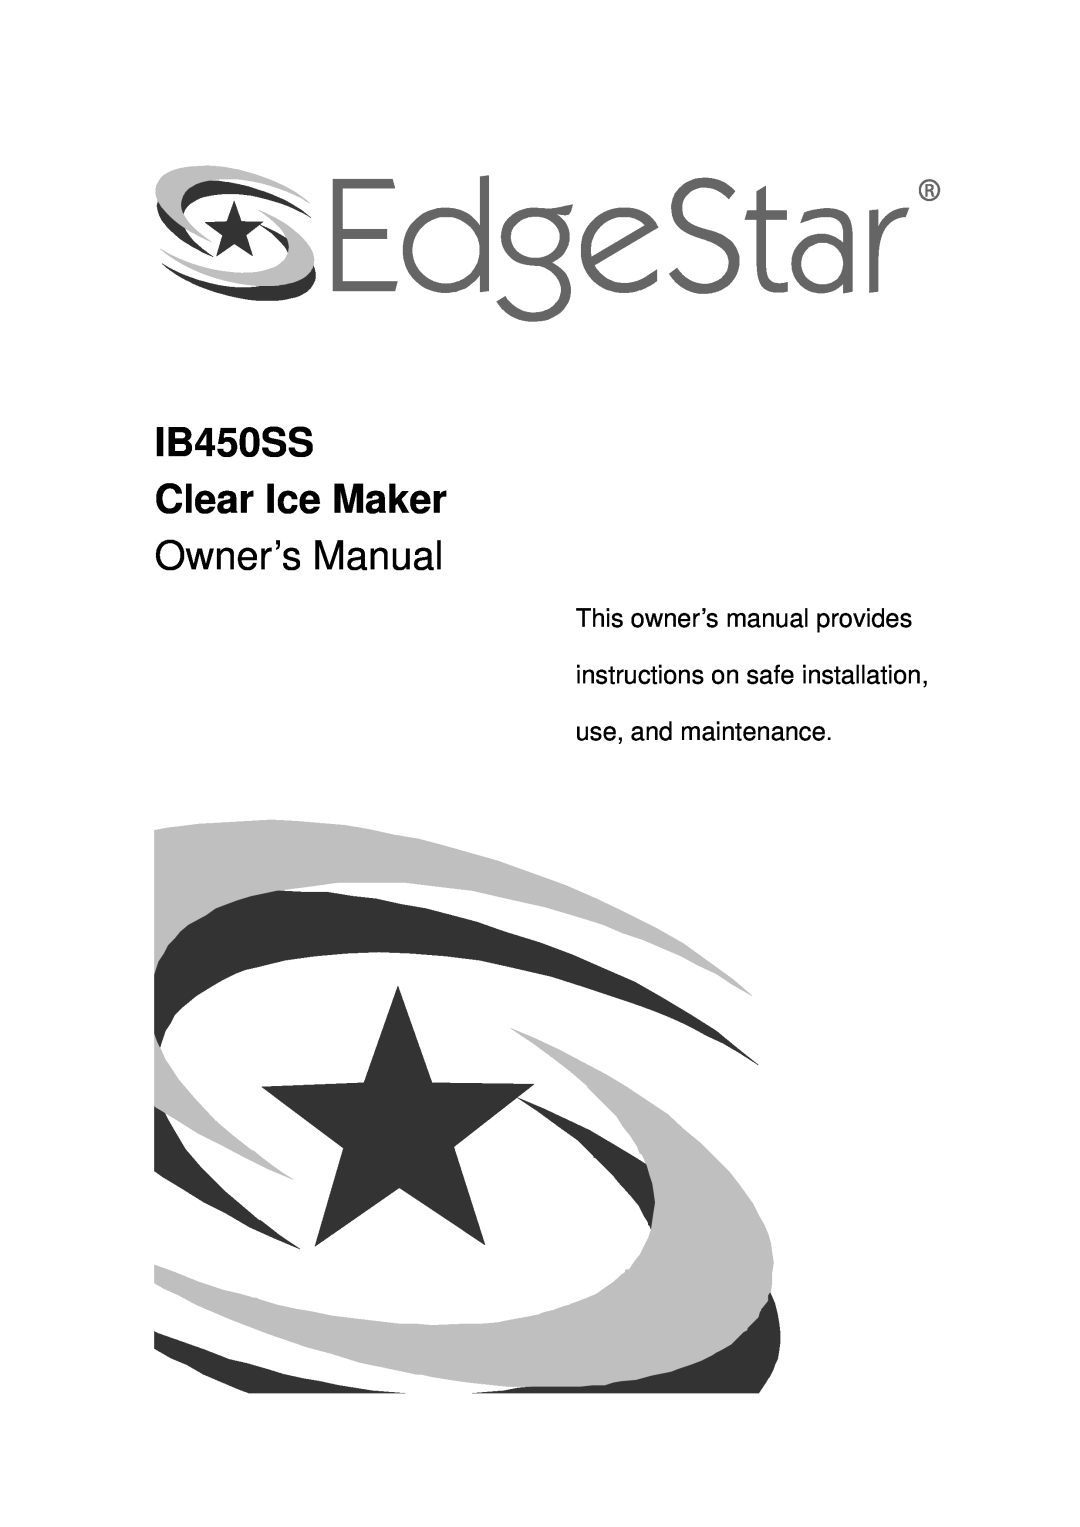 EdgeStar owner manual use, and maintenance, IB450SS Clear Ice Maker 